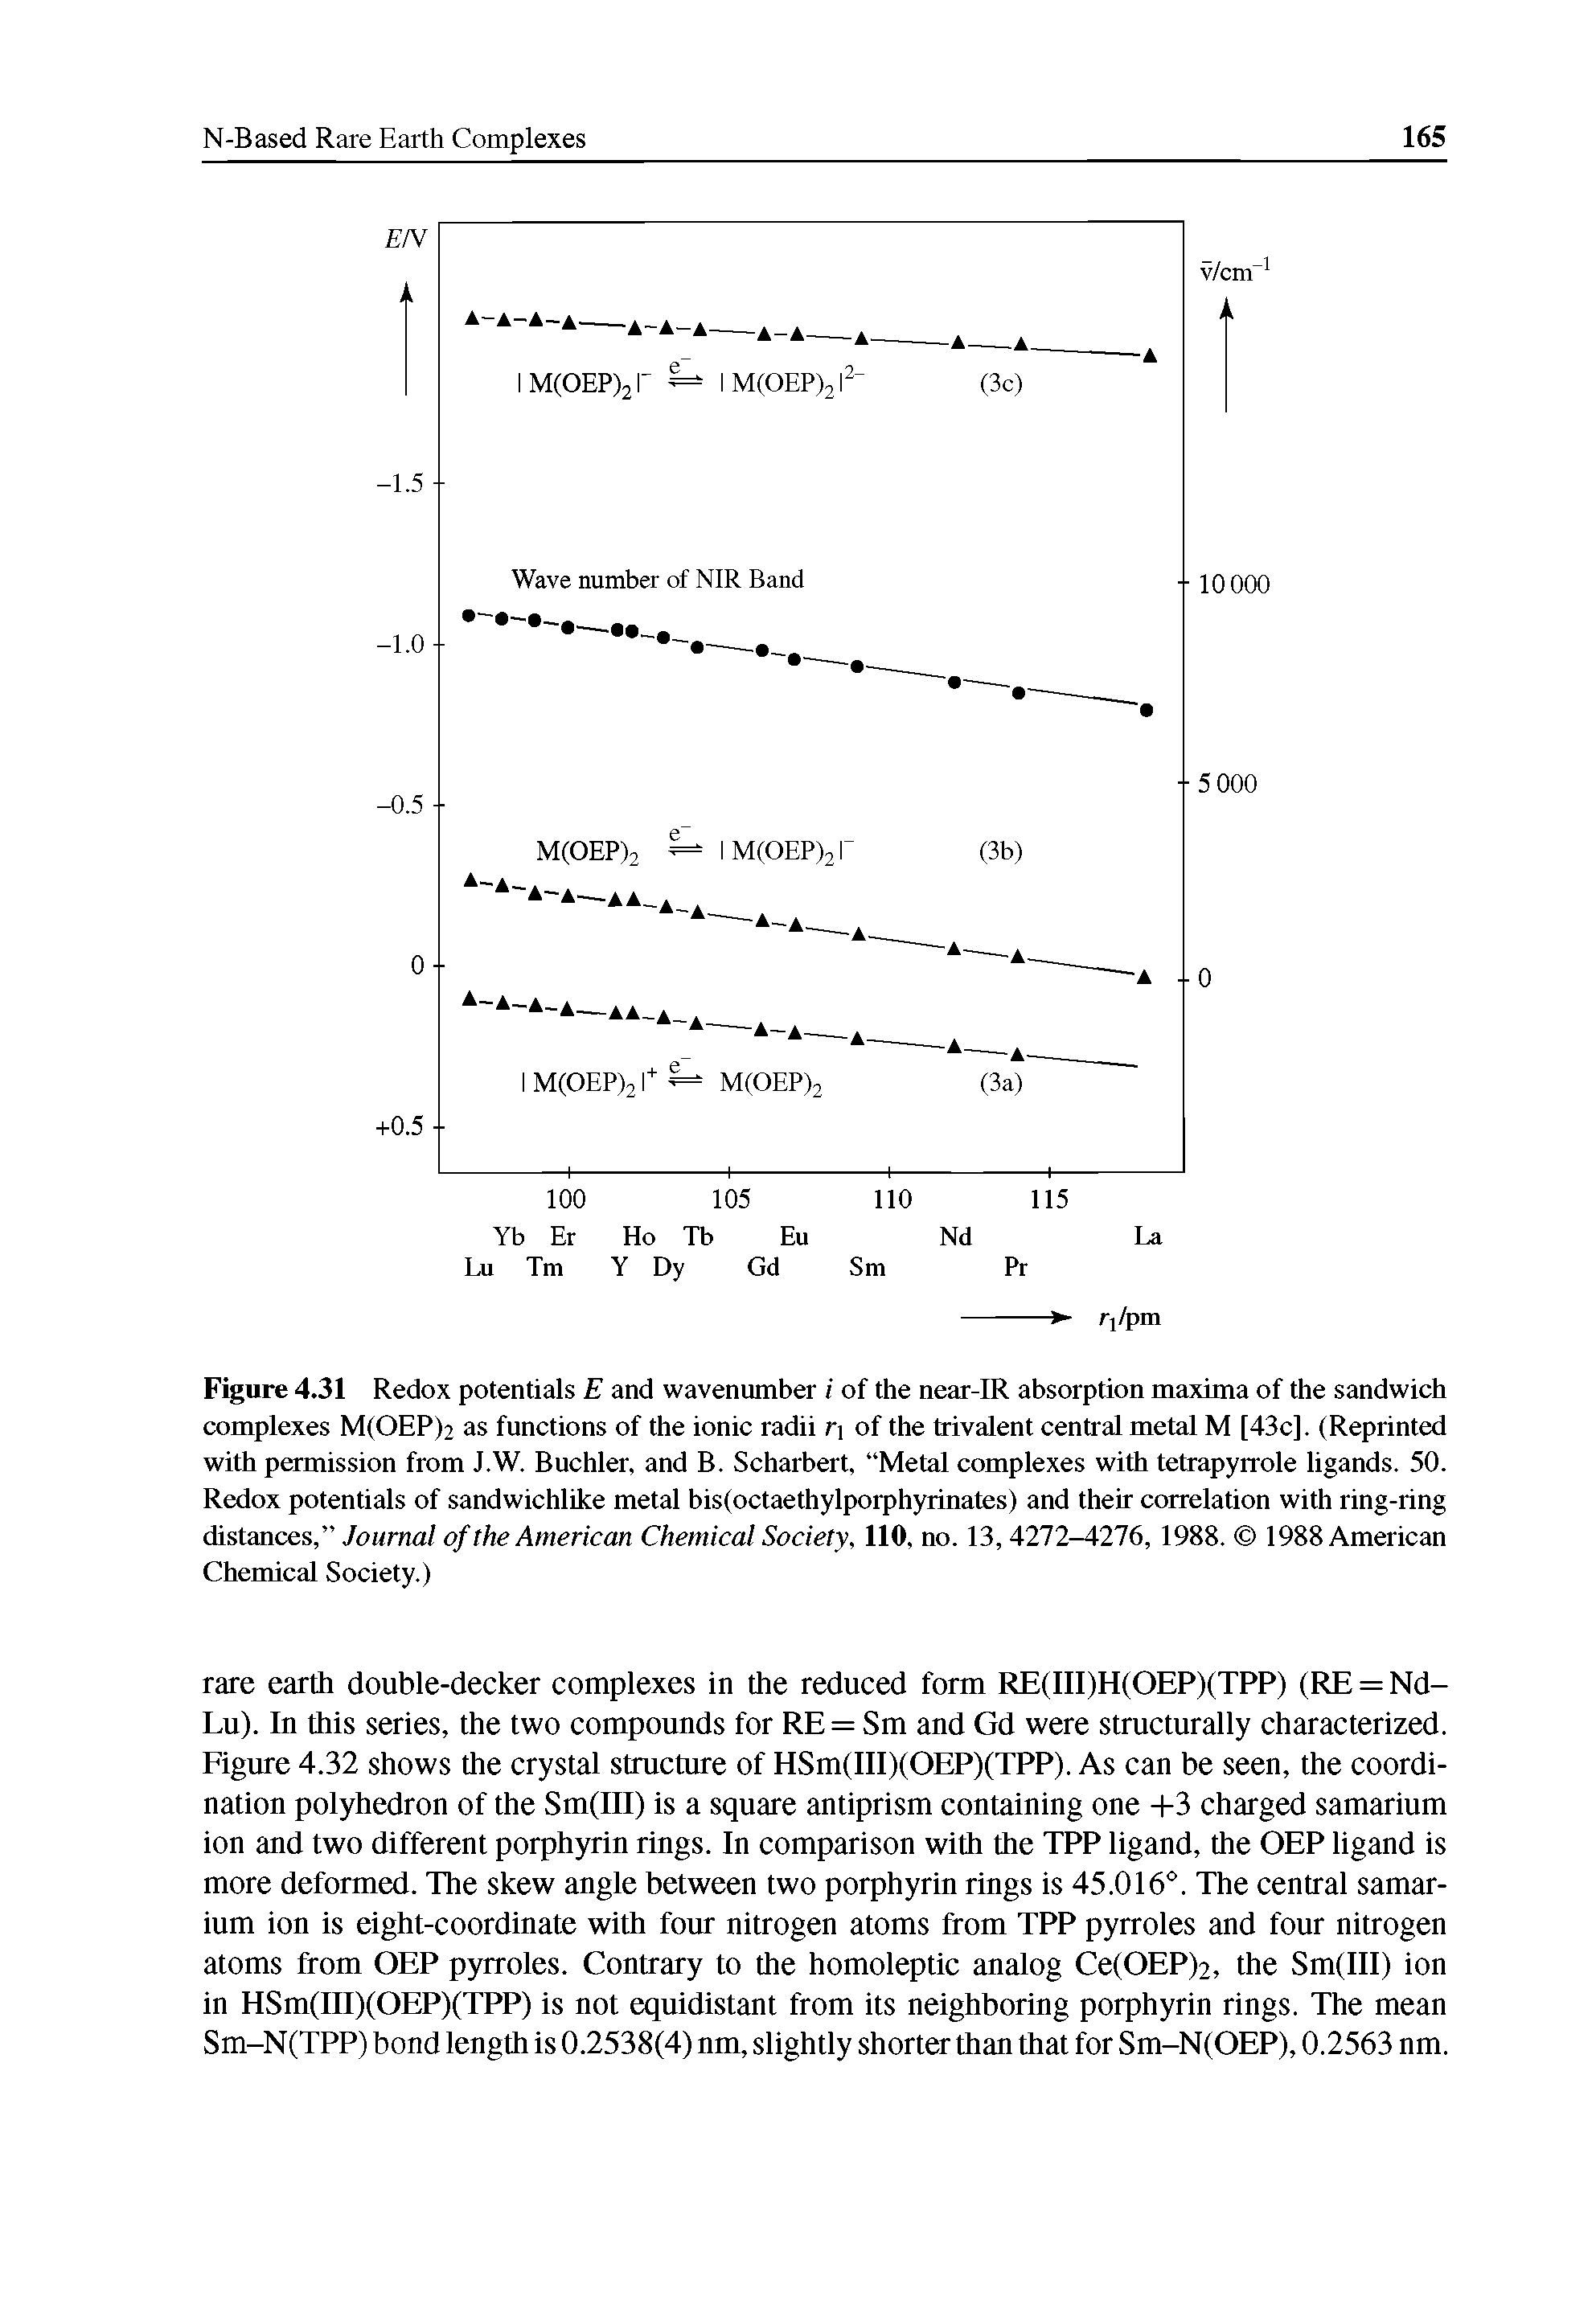 Figure 4.31 Redox potentials E and wavenumber i of the near-IR absorption maxima of the sandwich complexes M(OEP)2 as functions of the ionic radii r of the trivalent central metal M [43c]. (Reprinted with permission from J.W. Buchler, and B. Scharbert, Metal complexes with tetrapyrrole ligands. 50. Redox potentials of sandwichlike metal bis(octaethylporphyrinates) and their correlation with ring-ring distances, Journal of the American Chemical Society, 110, no. 13, 4272-4276, 1988. 1988 American Chemical Society.)...